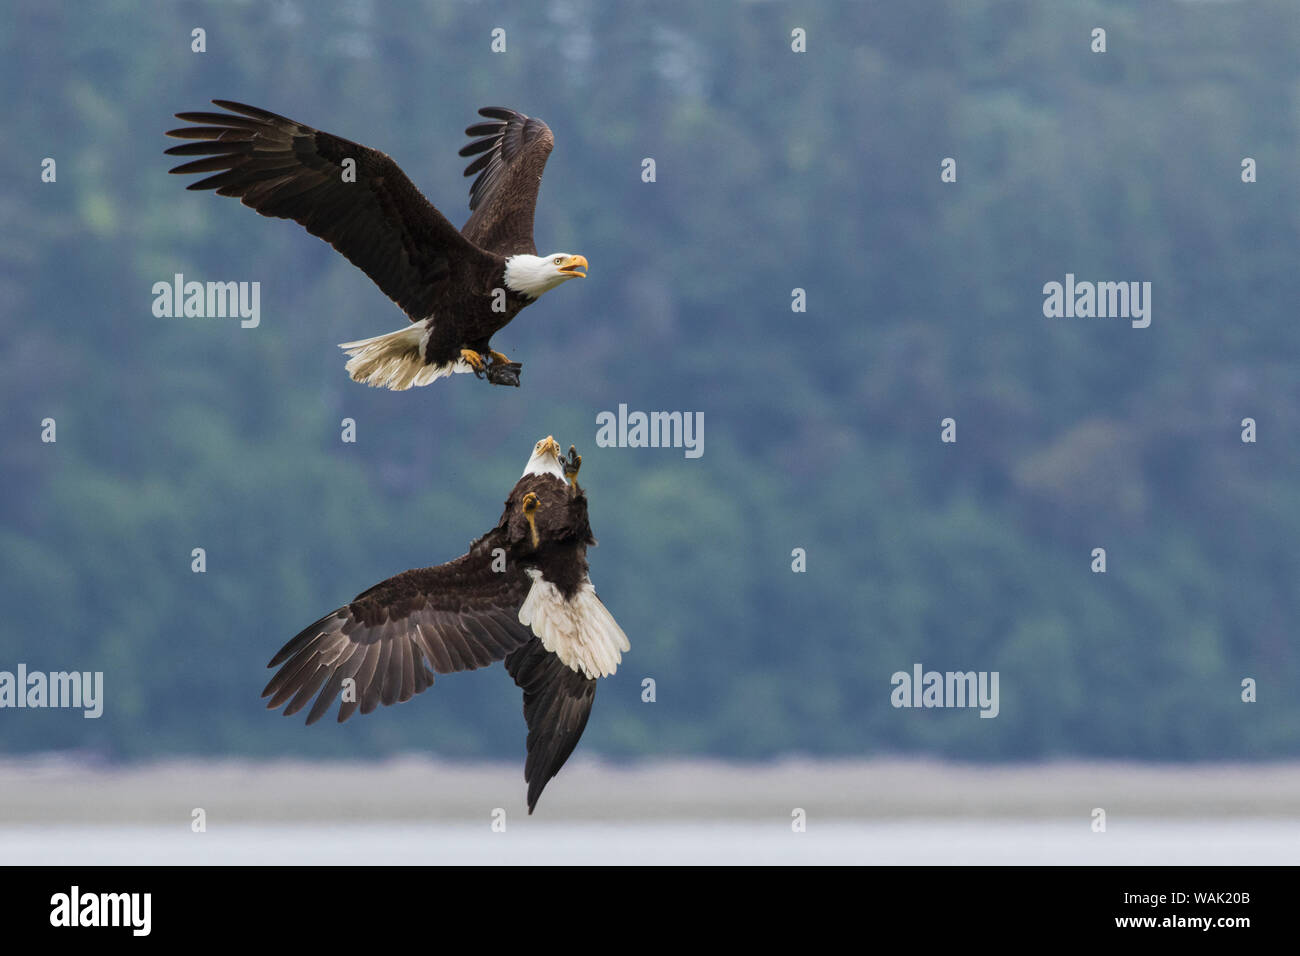 Bald eagle pair battle over morsel of food Stock Photo